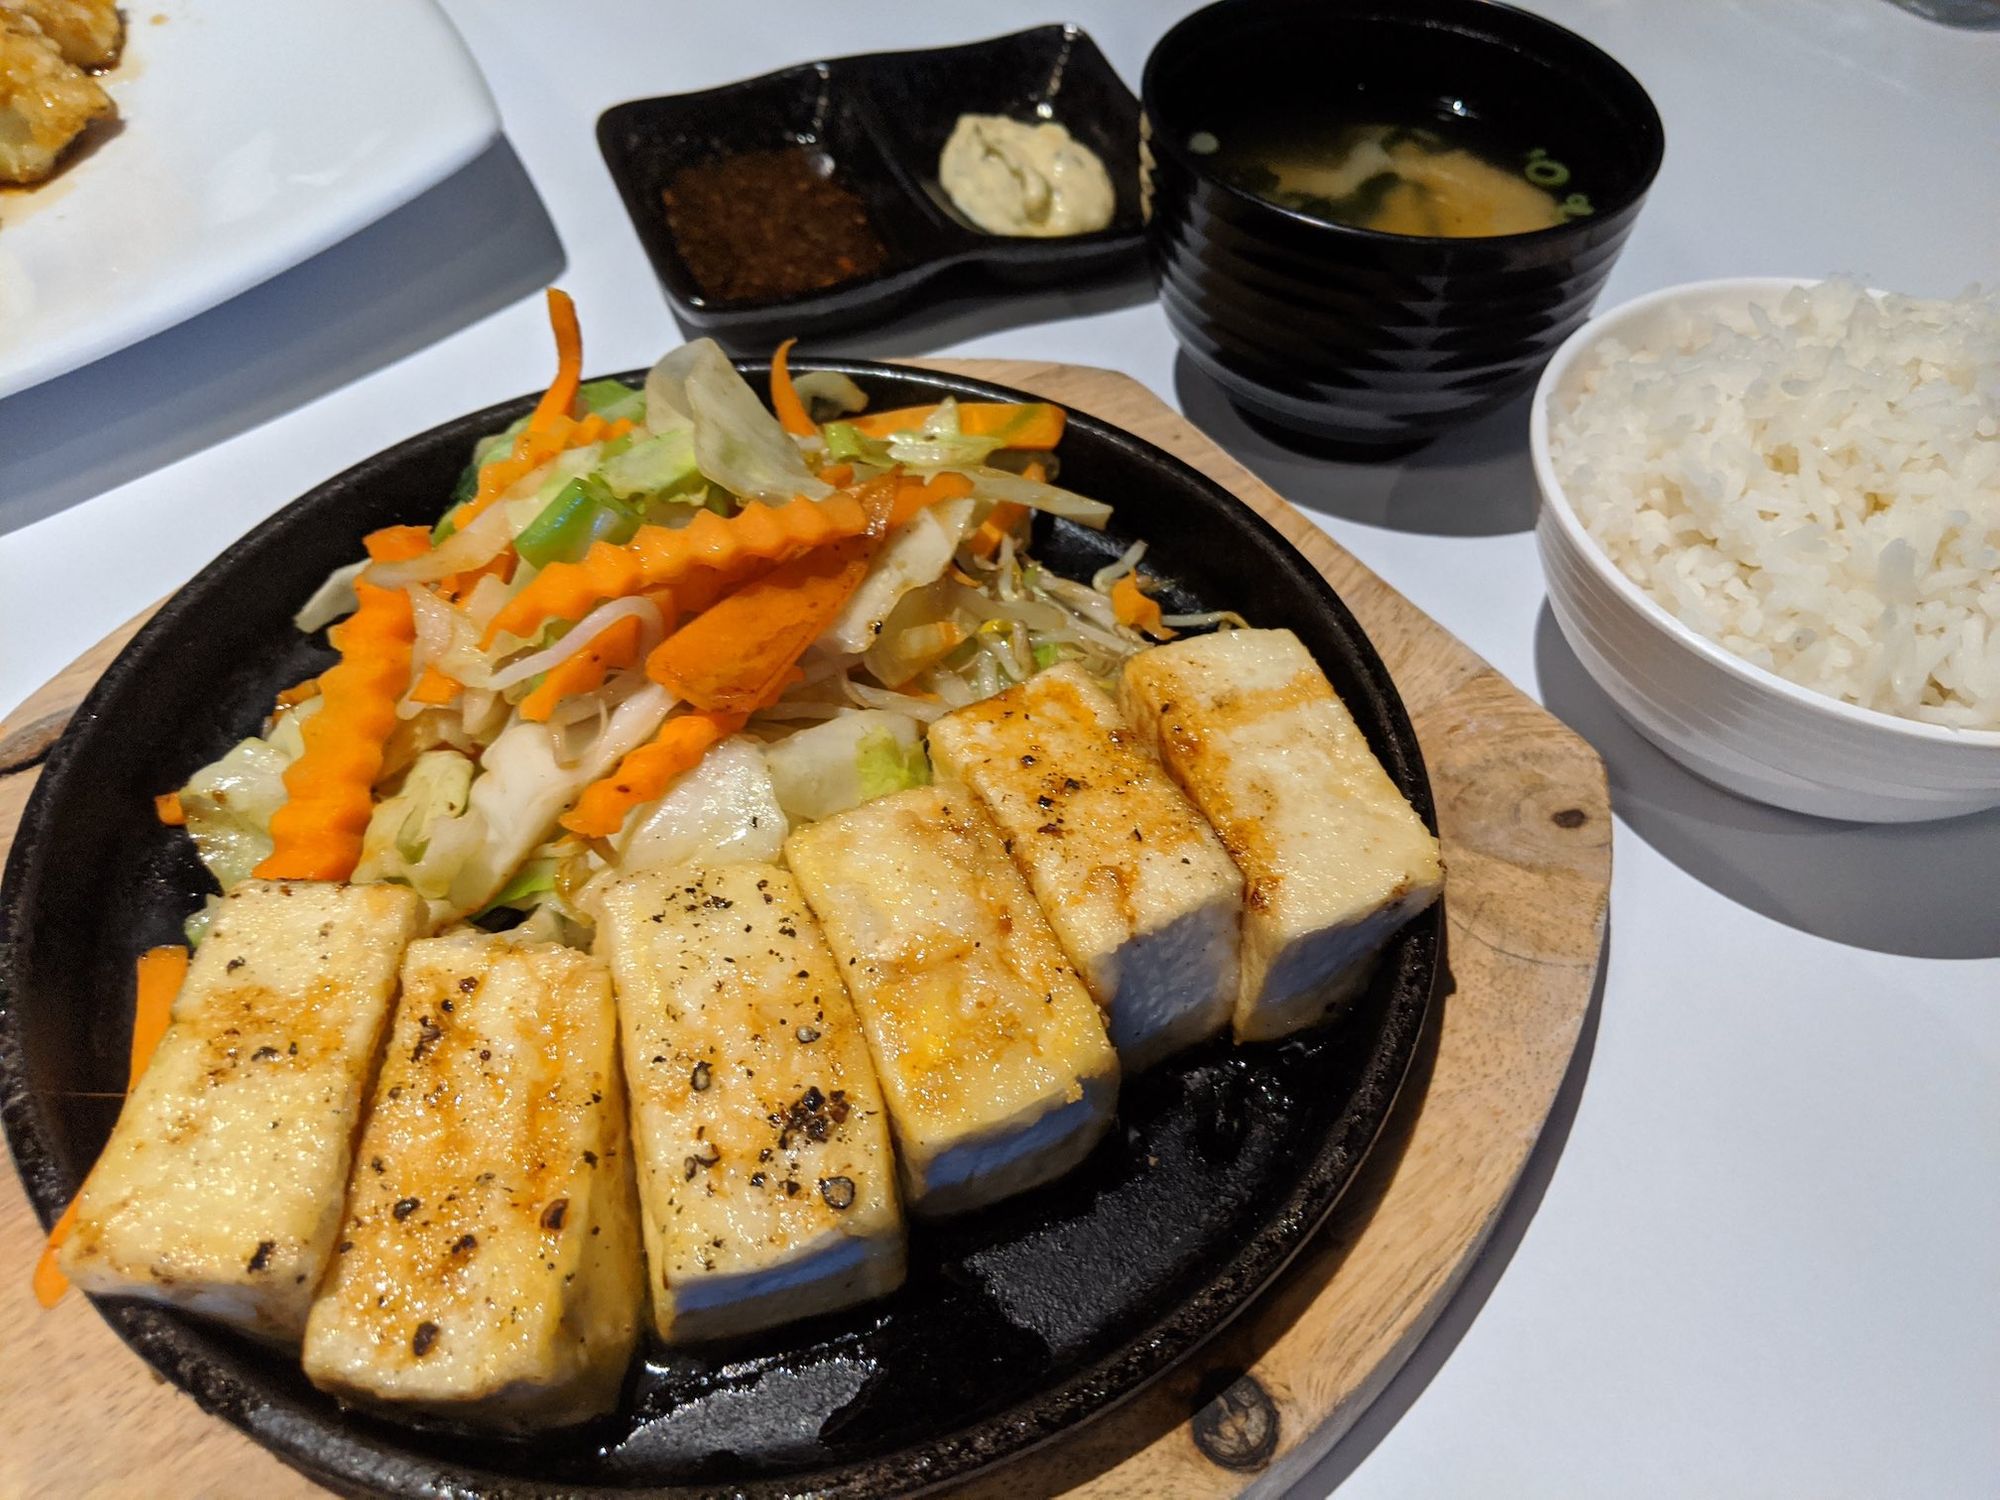 Tofu, veges on hotplate, with side of rice.